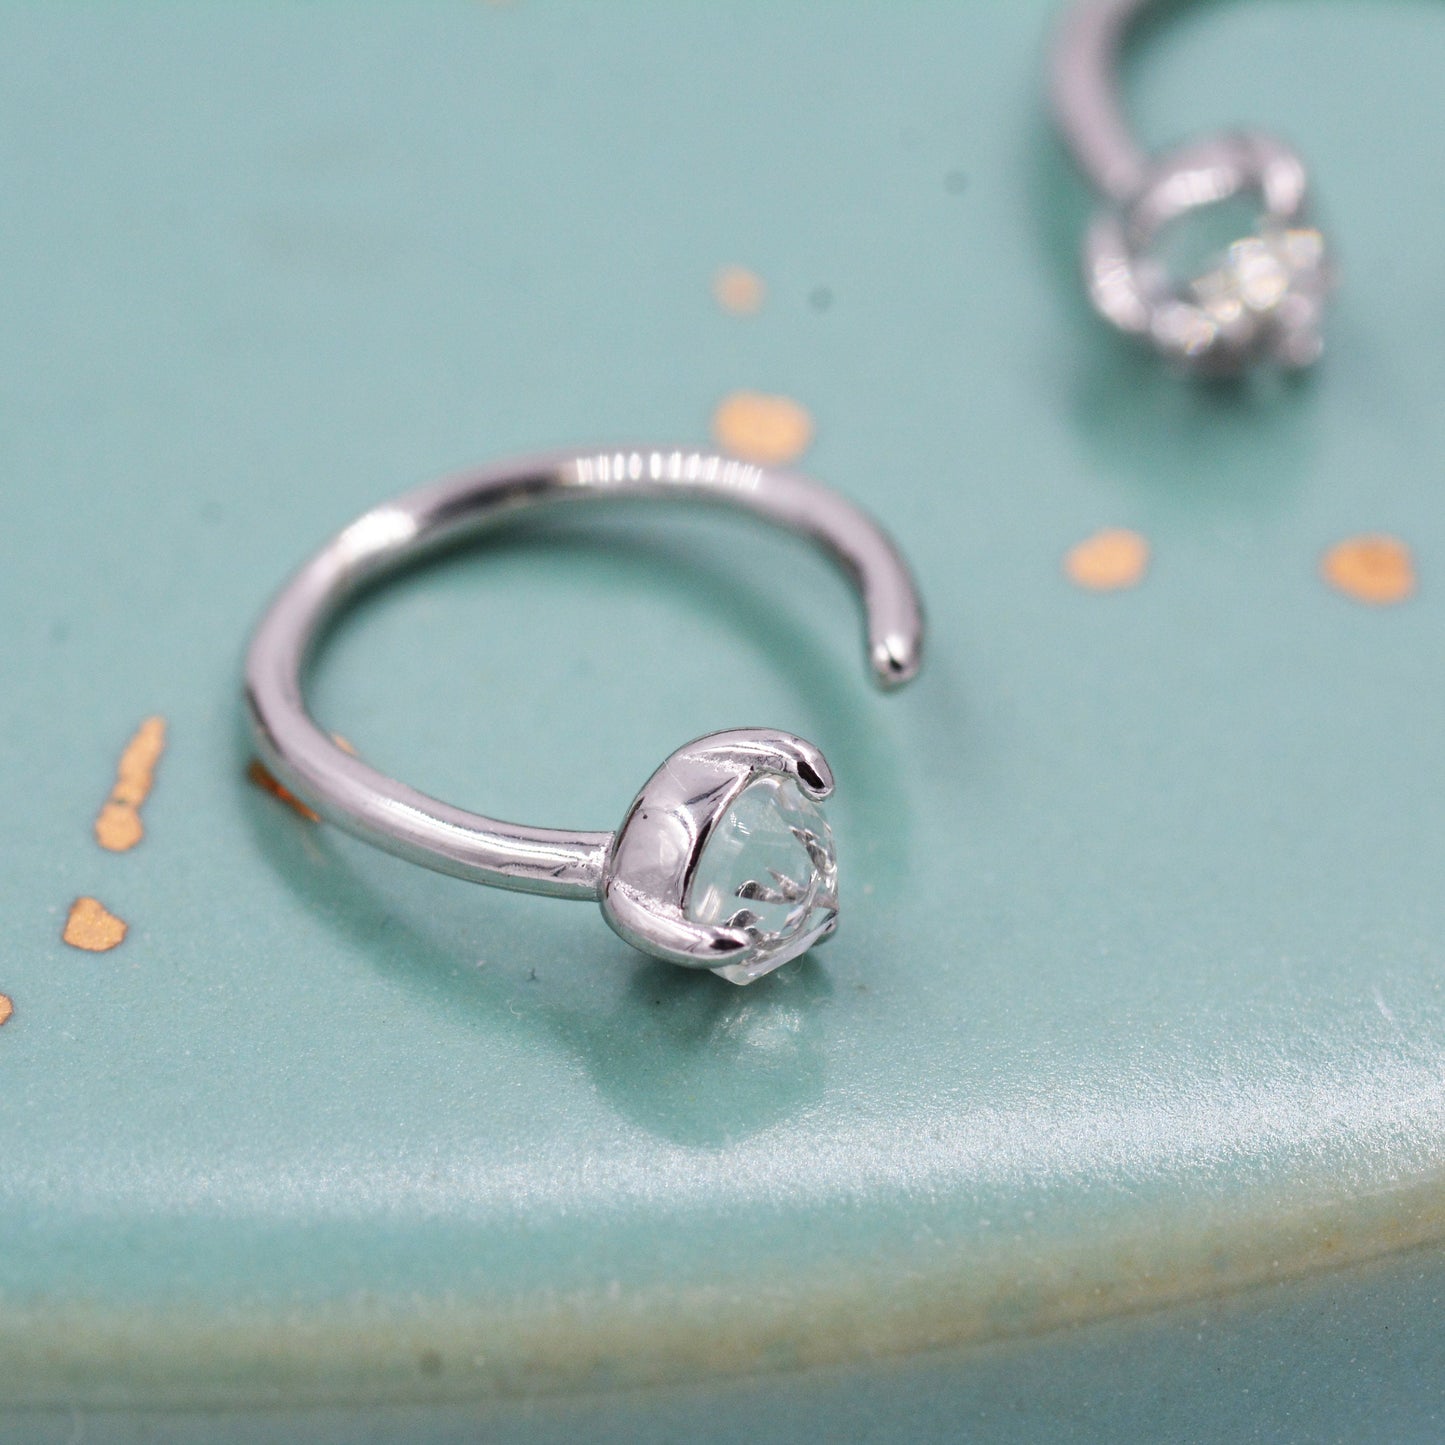 Natural White Topaz Crystal Huggie Hoop Threader Earrings in Sterling Silver, 3mm Three Prong, Gold or Silver, Pull Through Open Hoops